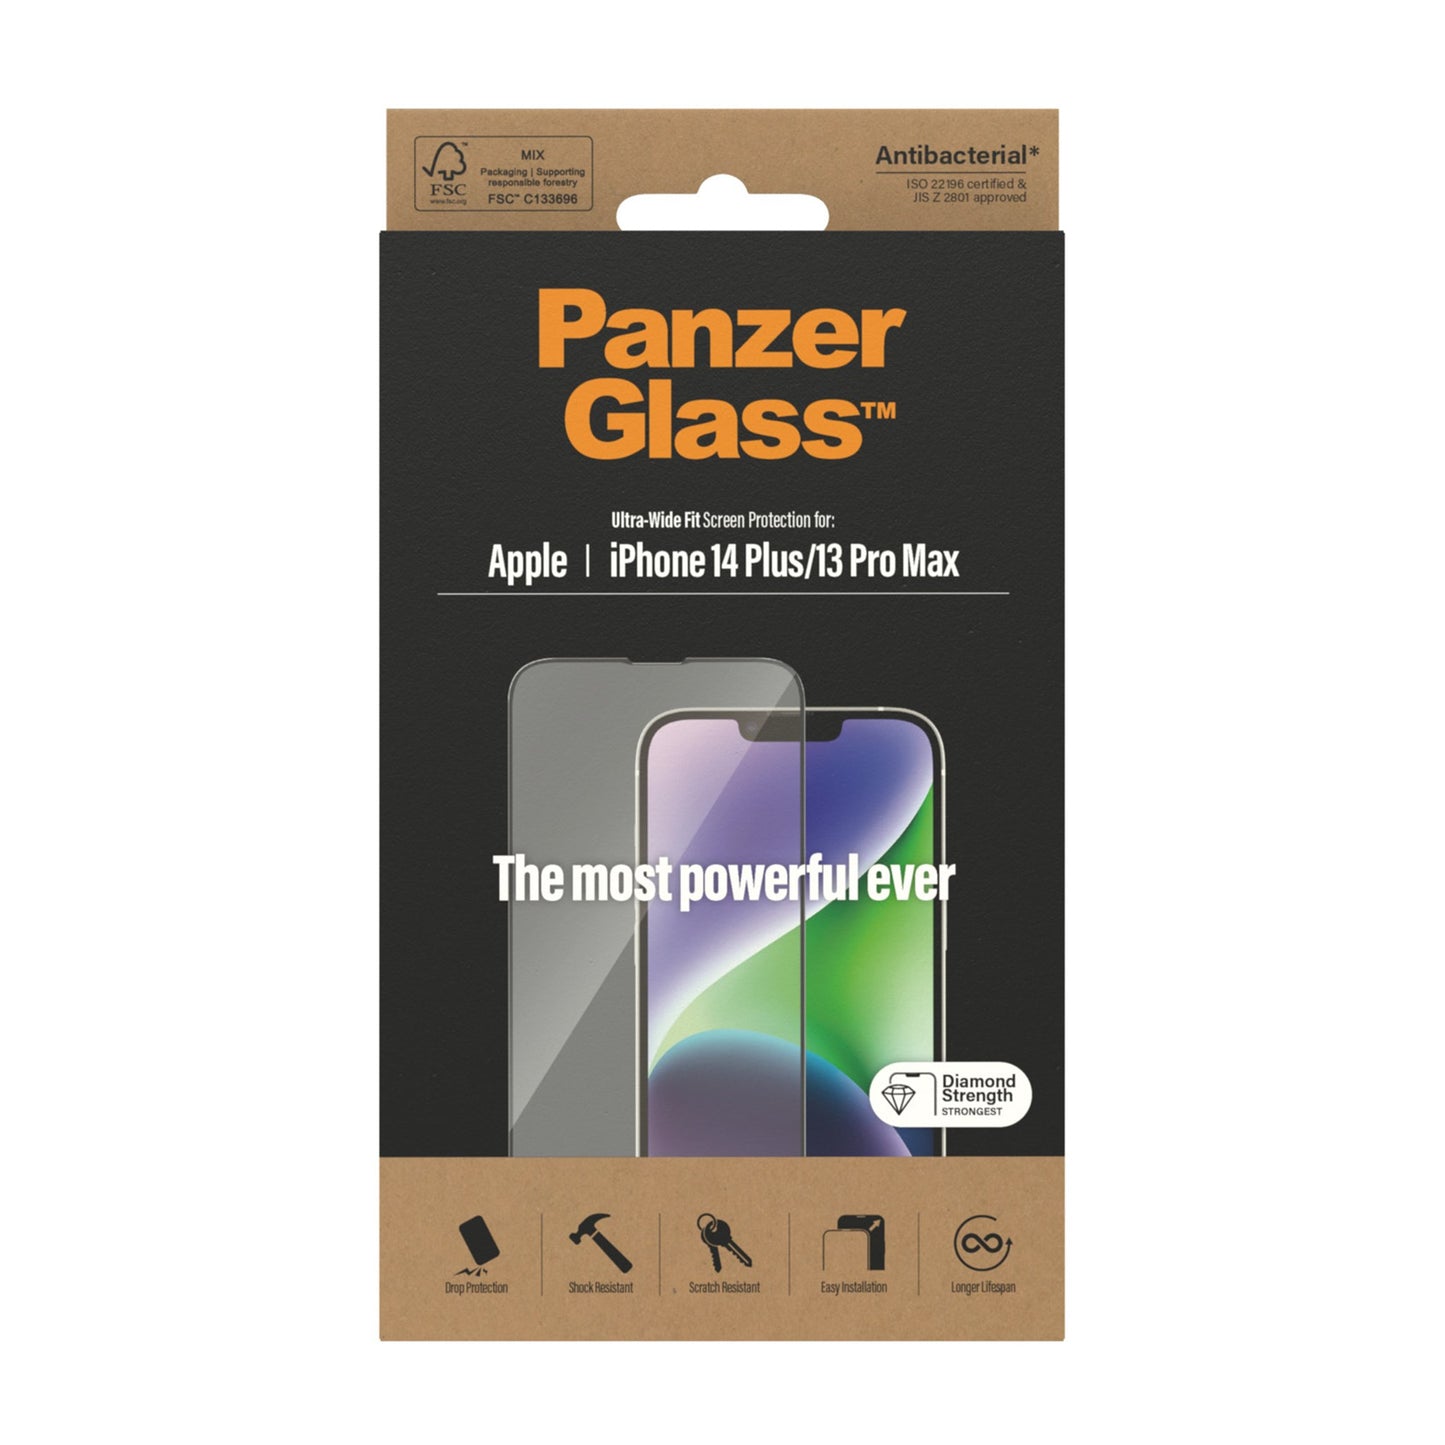 PanzerGlass® Screen Protector Apple iPhone 14 Plus | 13 Pro Max | Ultra-Wide Fit 3